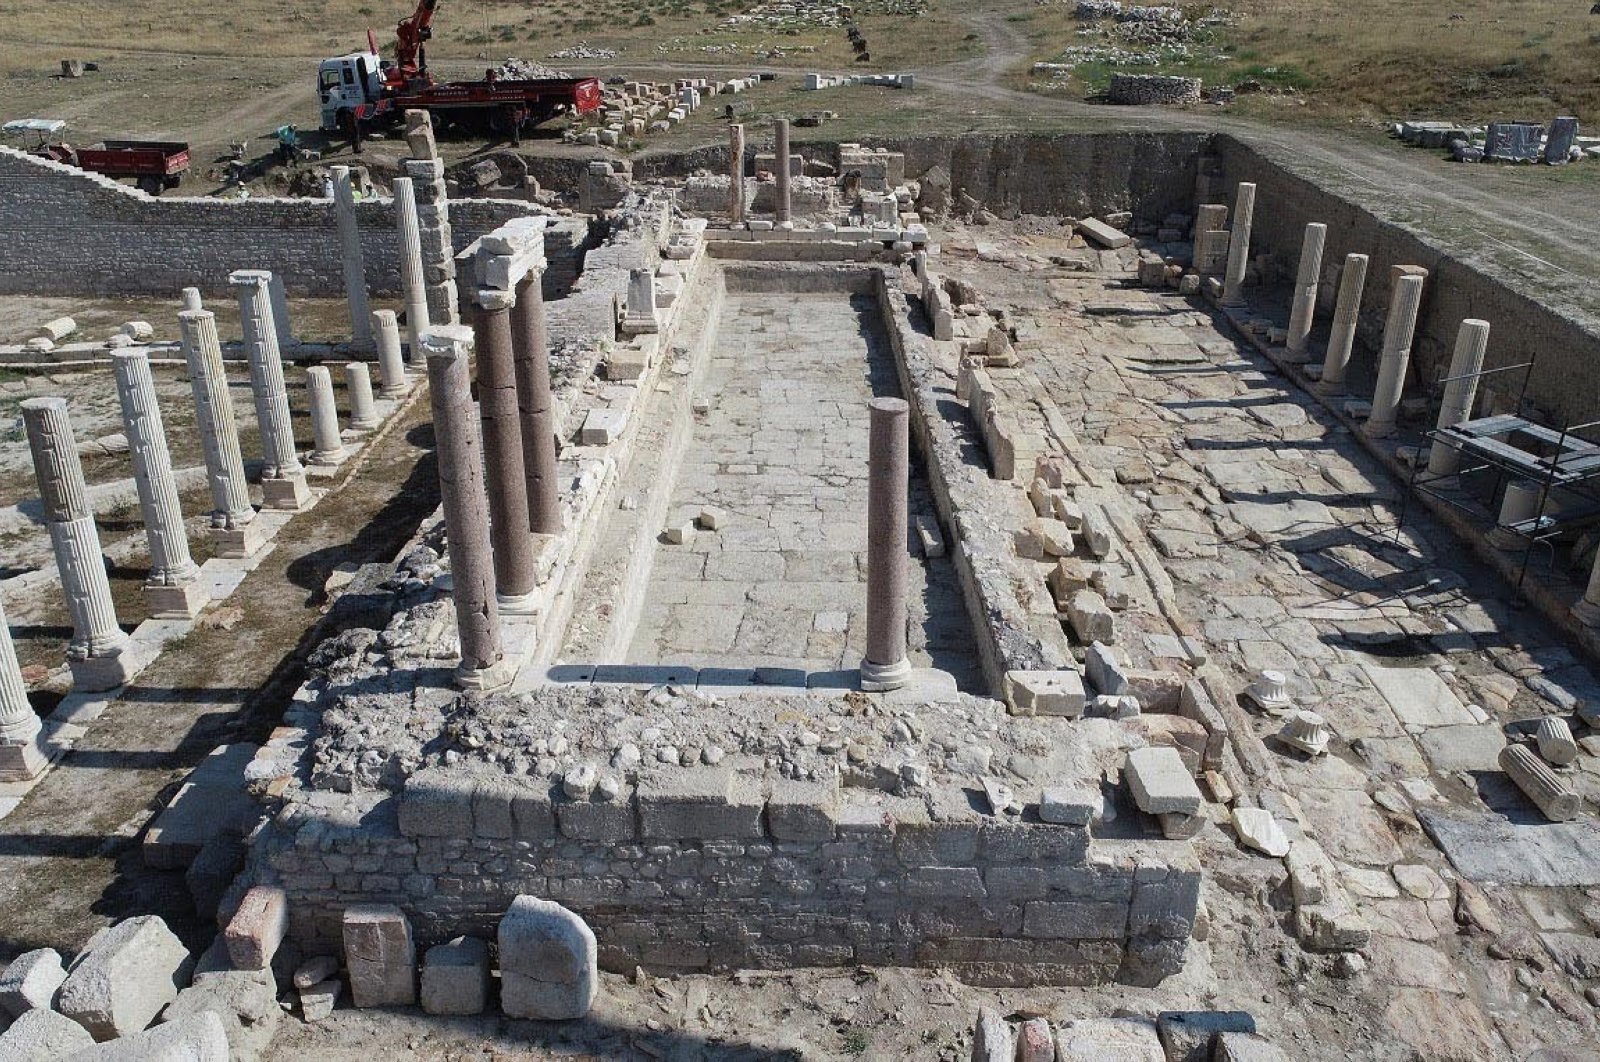 A general view of the monumental fountain, estimated to date back to the second century A.D, in the ancient city of Tripolis, Denizli, western Turkey, July 24, 2020. (DHA Photo)